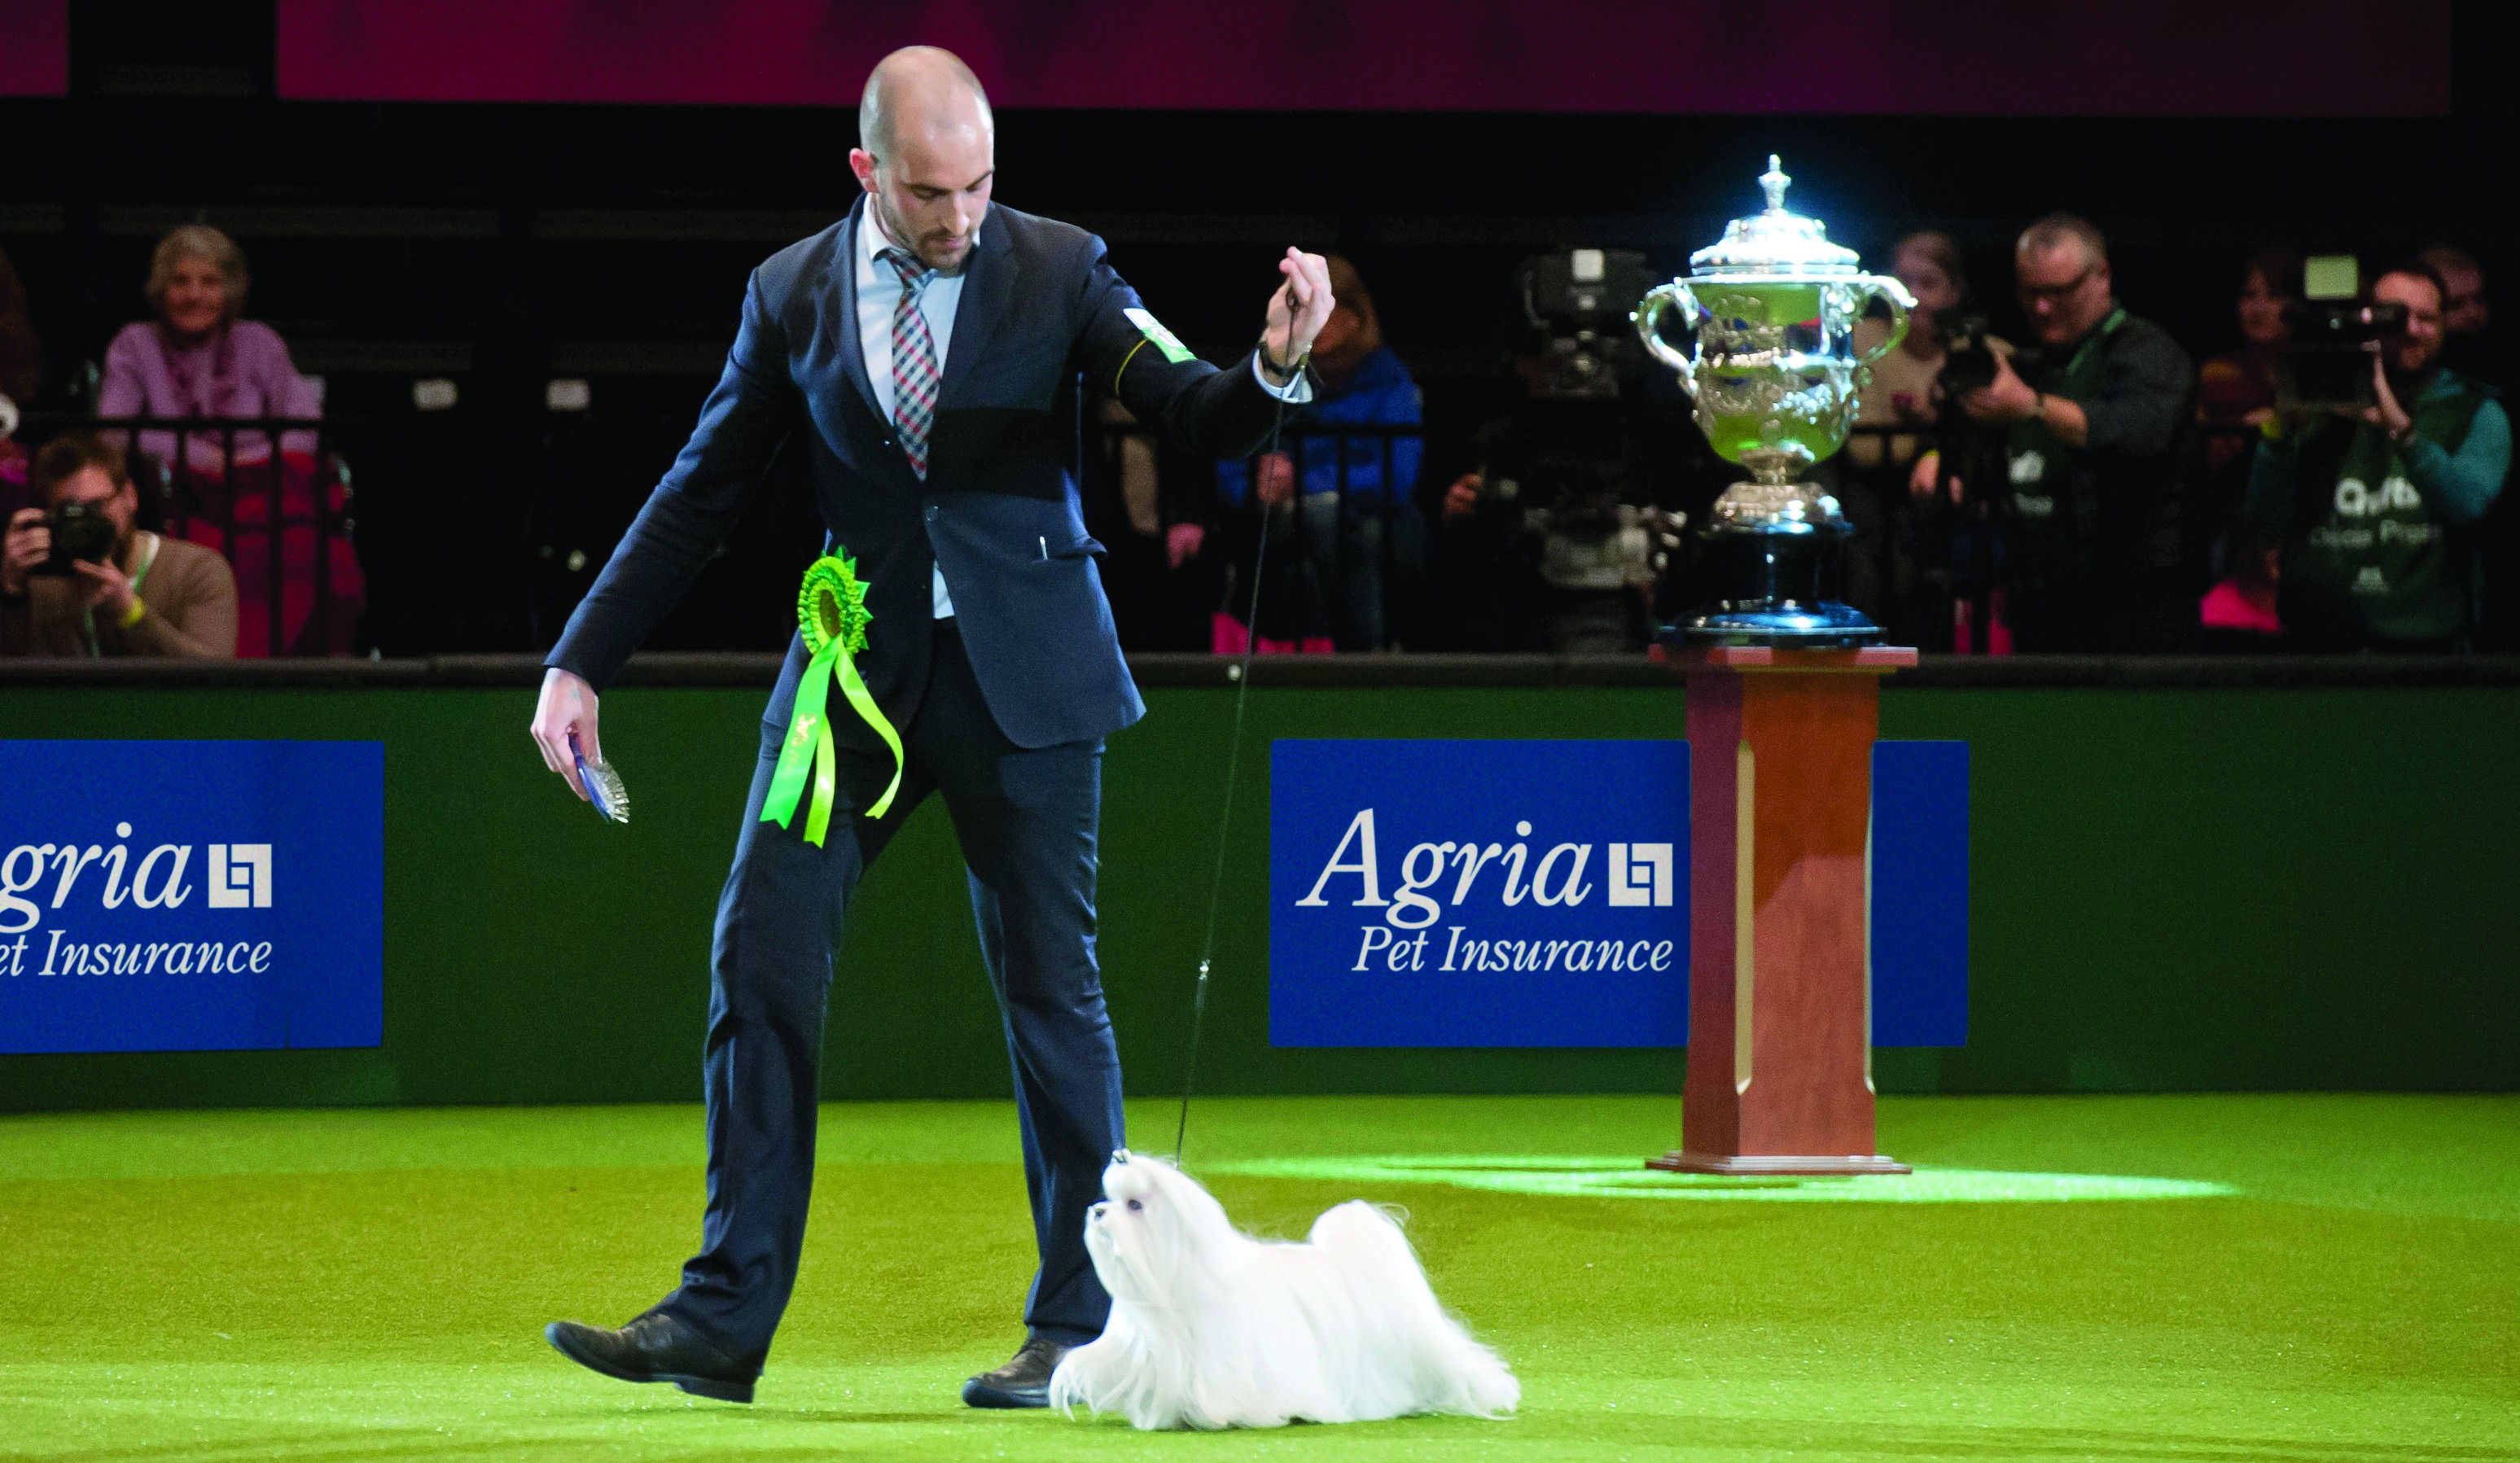 Agria encourages pet owners to put care before pampering at Crufts